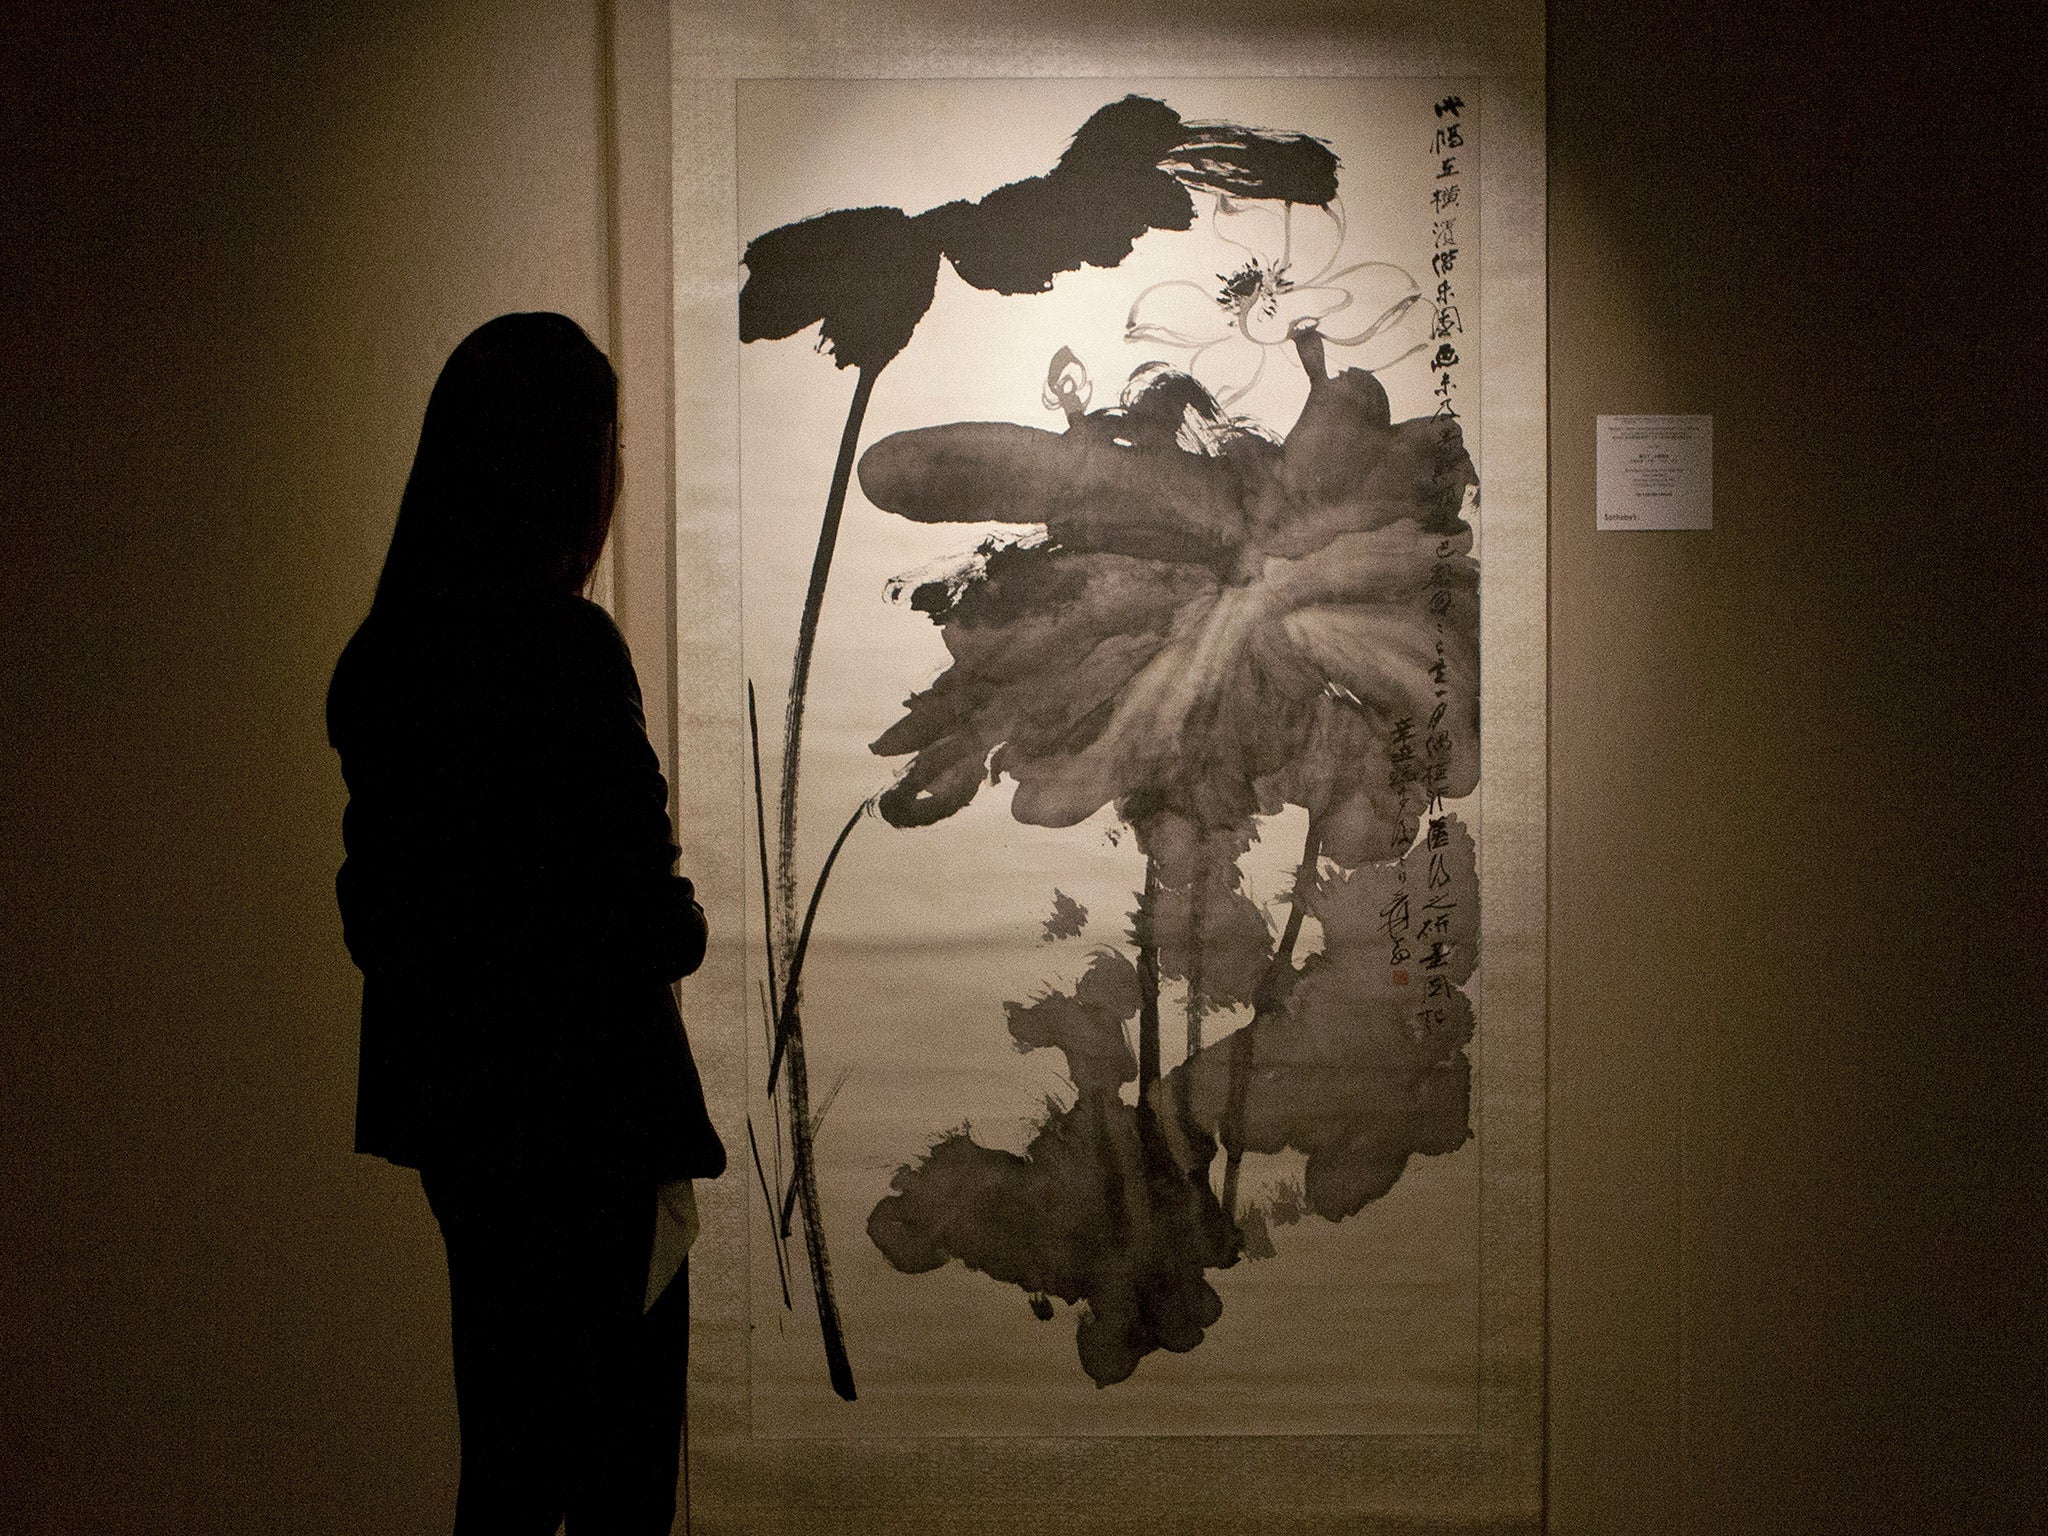 Artworks by Chinese painter Zhang Daqian were among the stolen pieces. Pictured: Daqian's 'Lotus in the Wind'. File photo